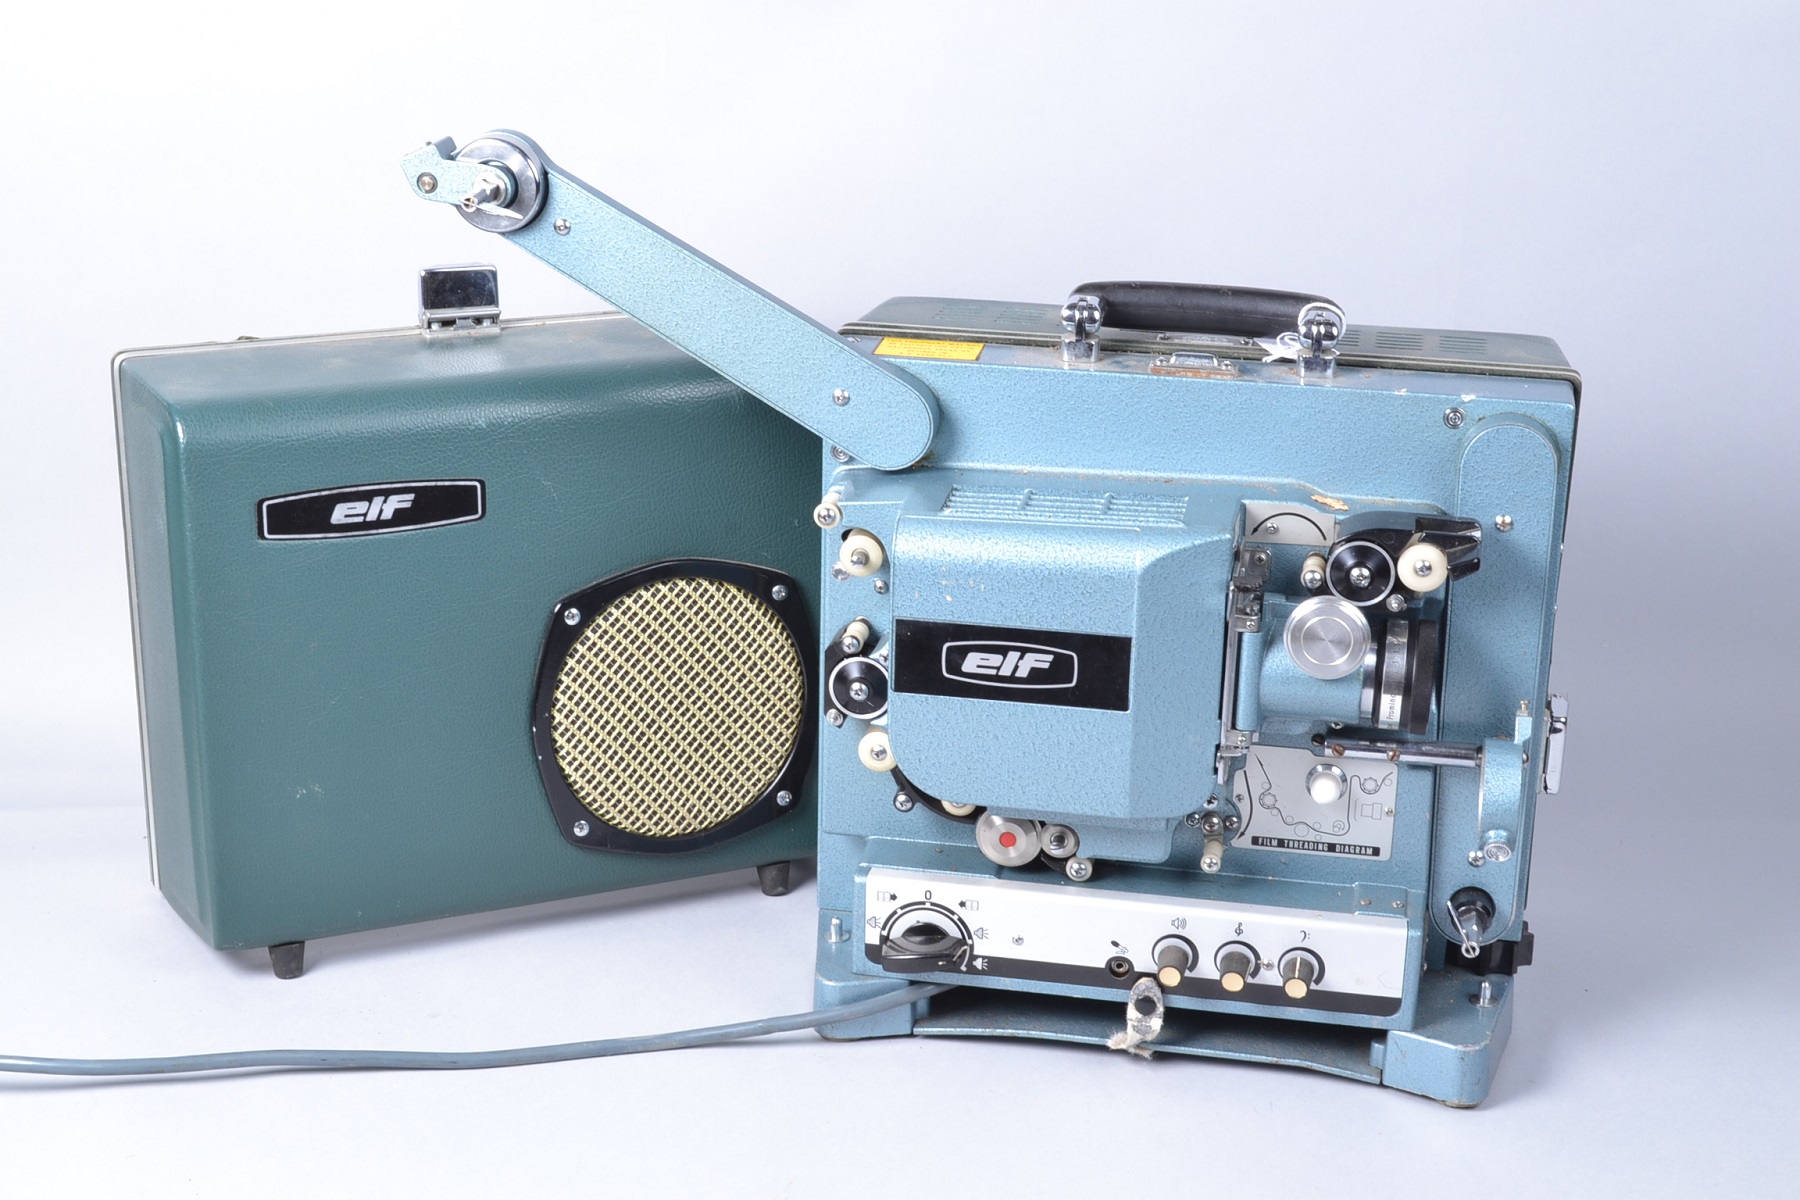 An Elf RM 1 16mm Sound Film Projector with Kowa Super Prominar 16 50mm f/1.3 lens, body G, untested